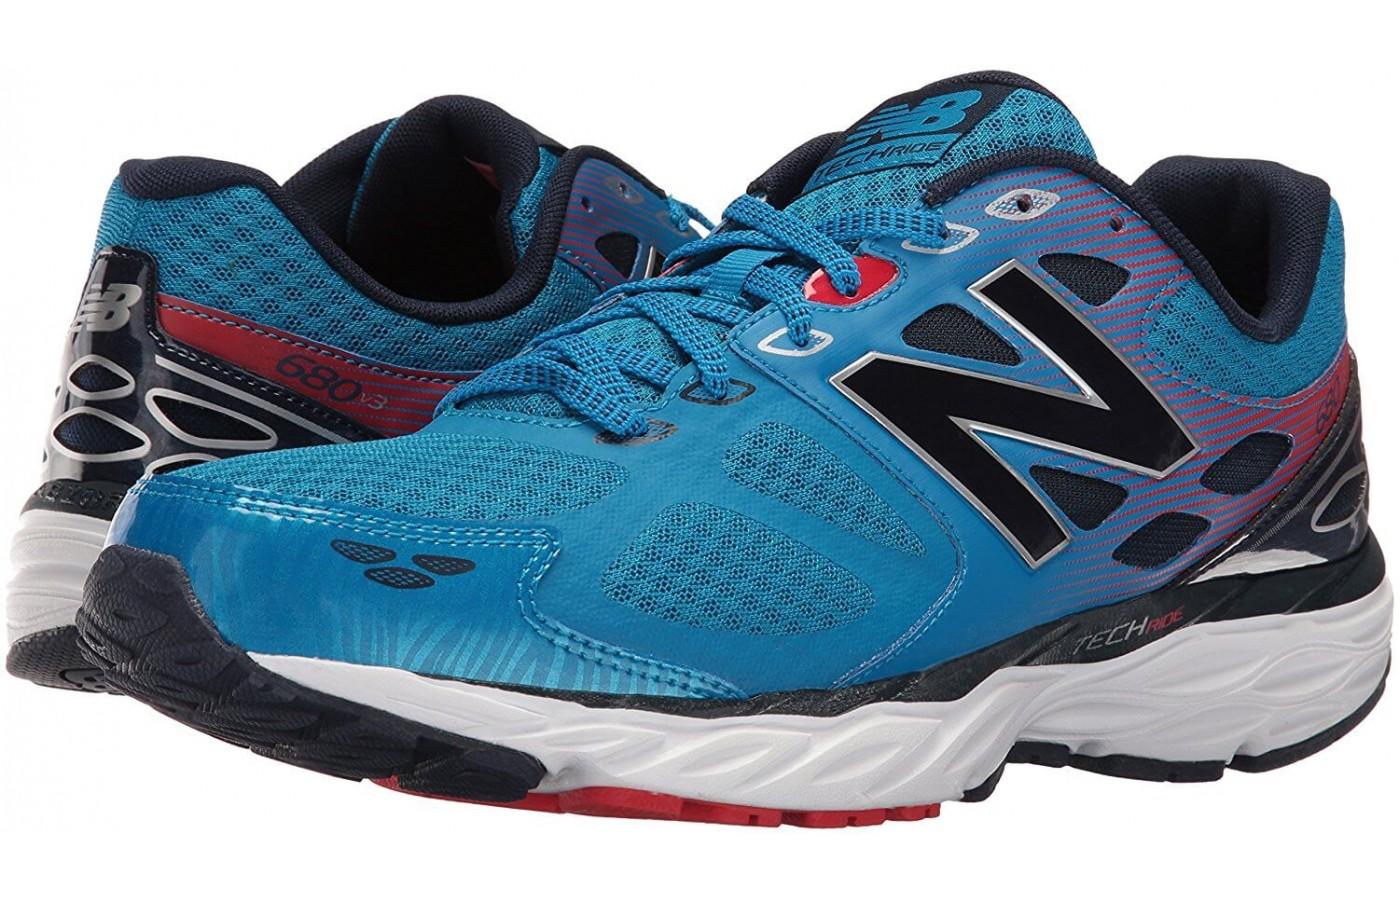 the New Balance 680 v3 is an affordable stability shoe